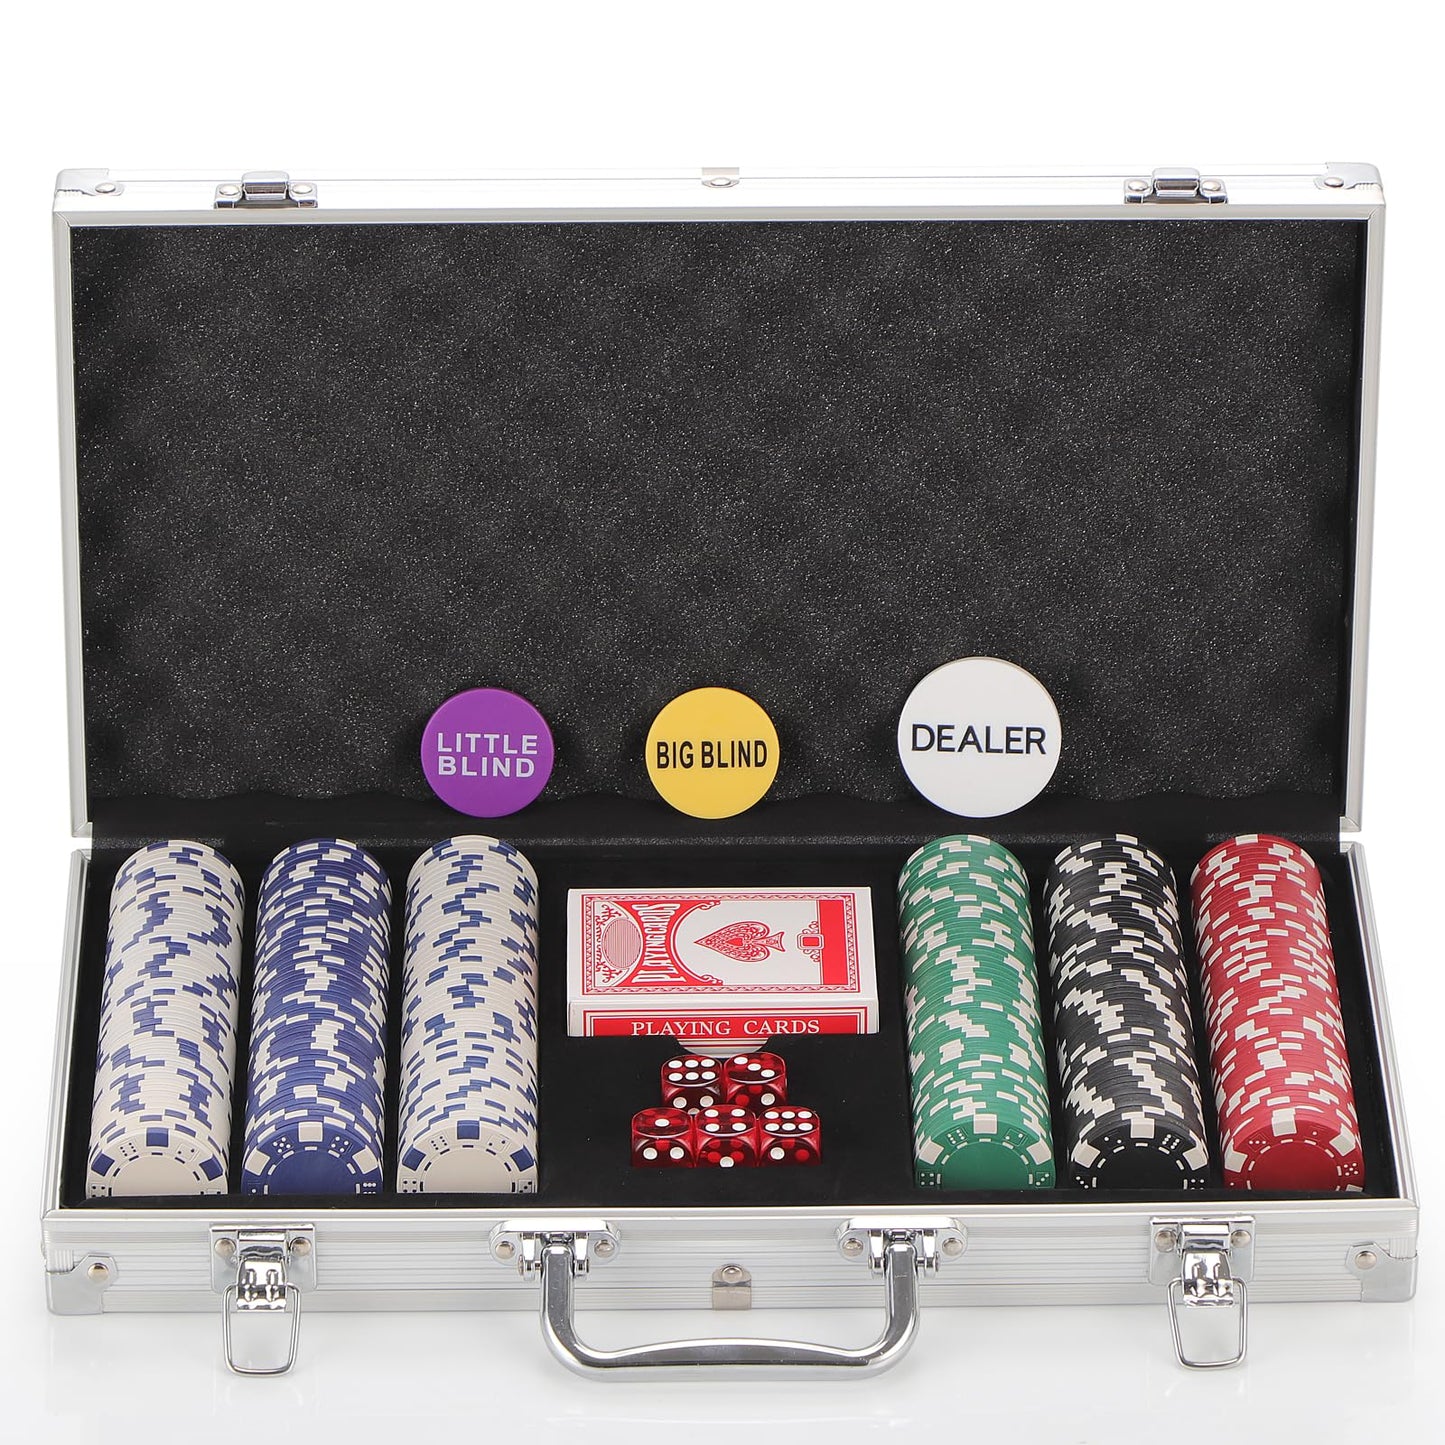 LUOBAO 300Pcs Poker Chips Set for Texas Holdem,Blackjack, Tournaments with Aluminum Case,2 Decks of Cards, Dealer, Small Blind, Big Blind Buttons and 5 Dice,11.5 Gram